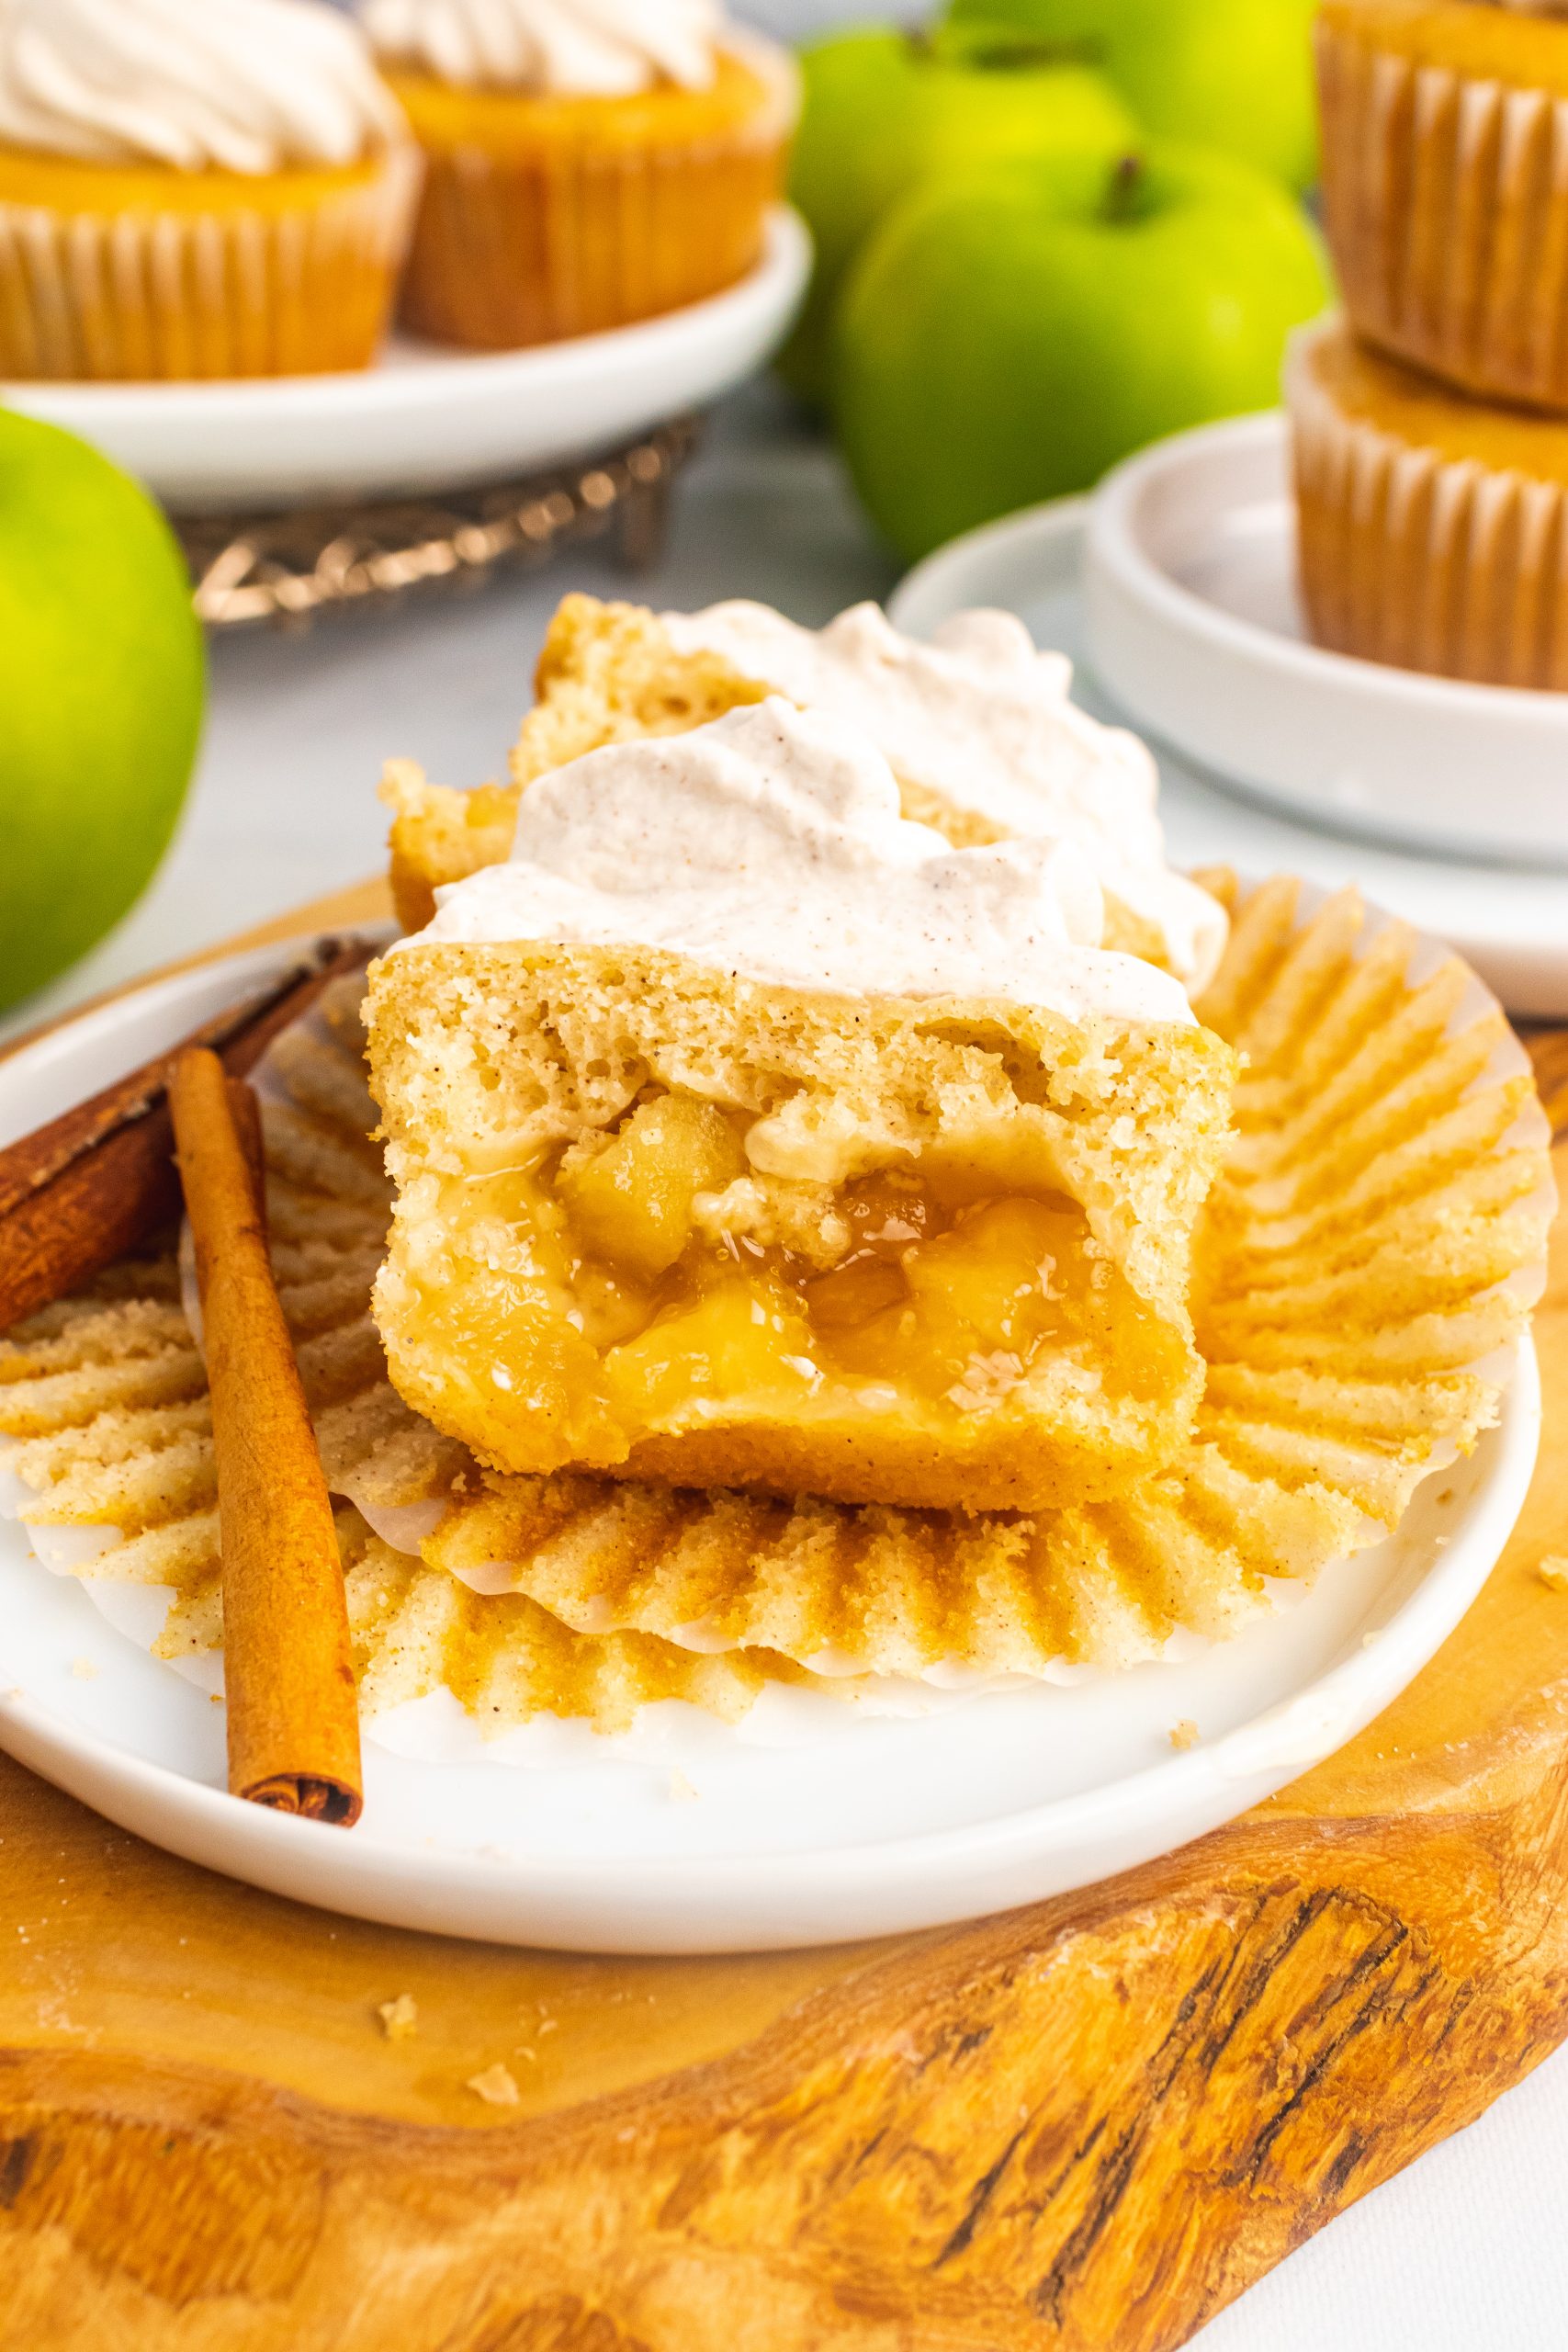 a frosted apple pie cupcake unwrapped and cut in half to reveal the pie filling hidden in the center